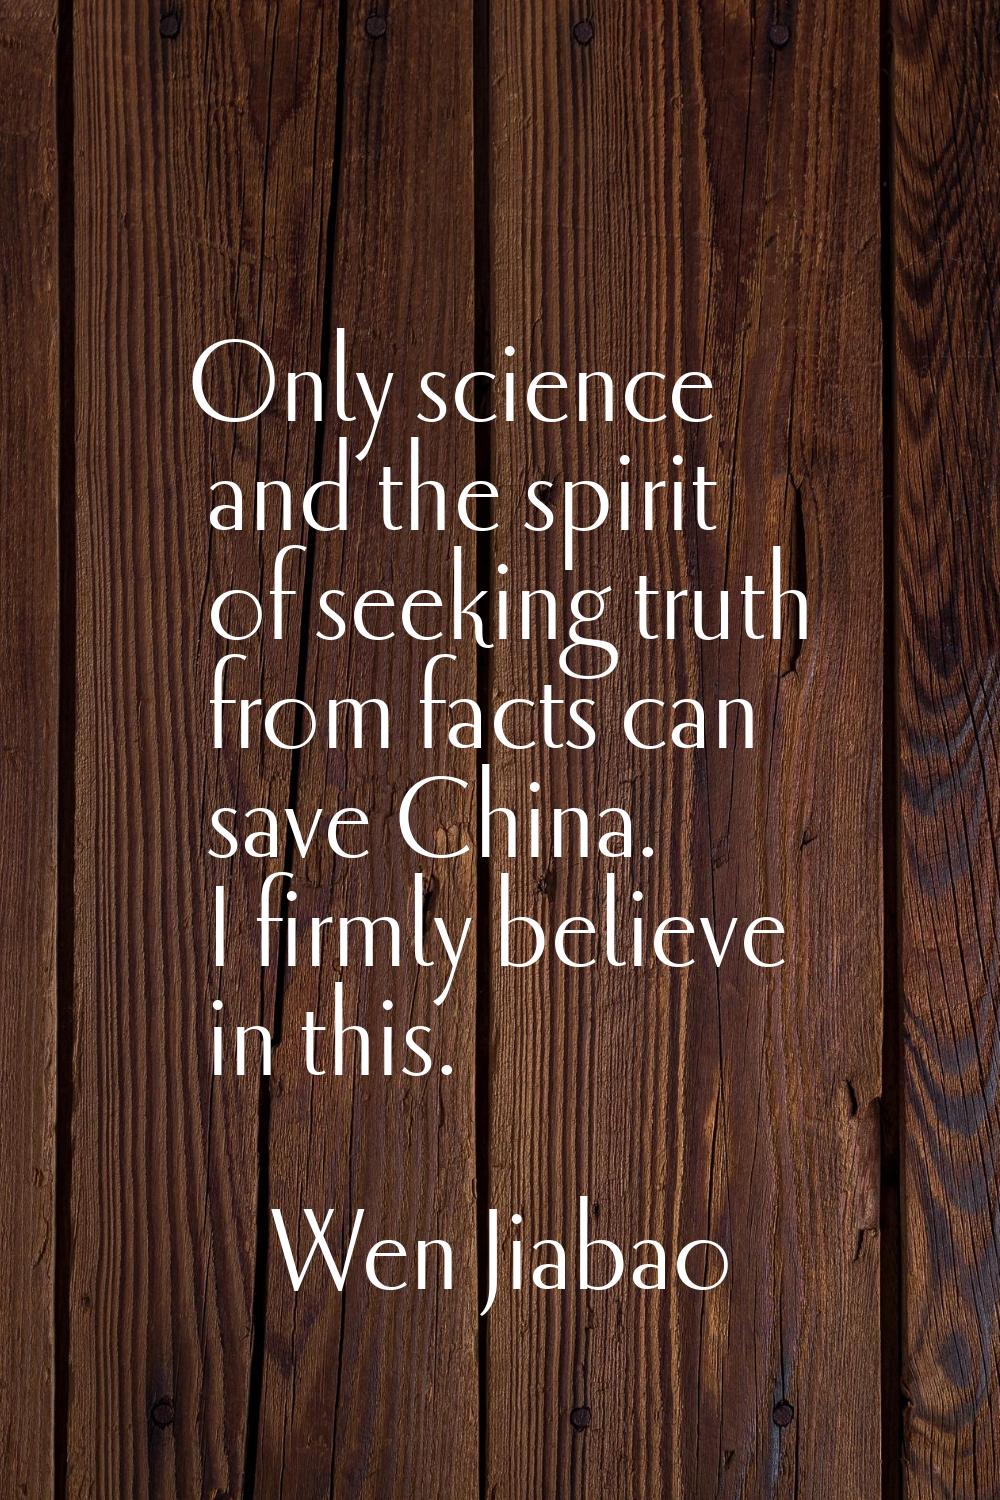 Only science and the spirit of seeking truth from facts can save China. I firmly believe in this.